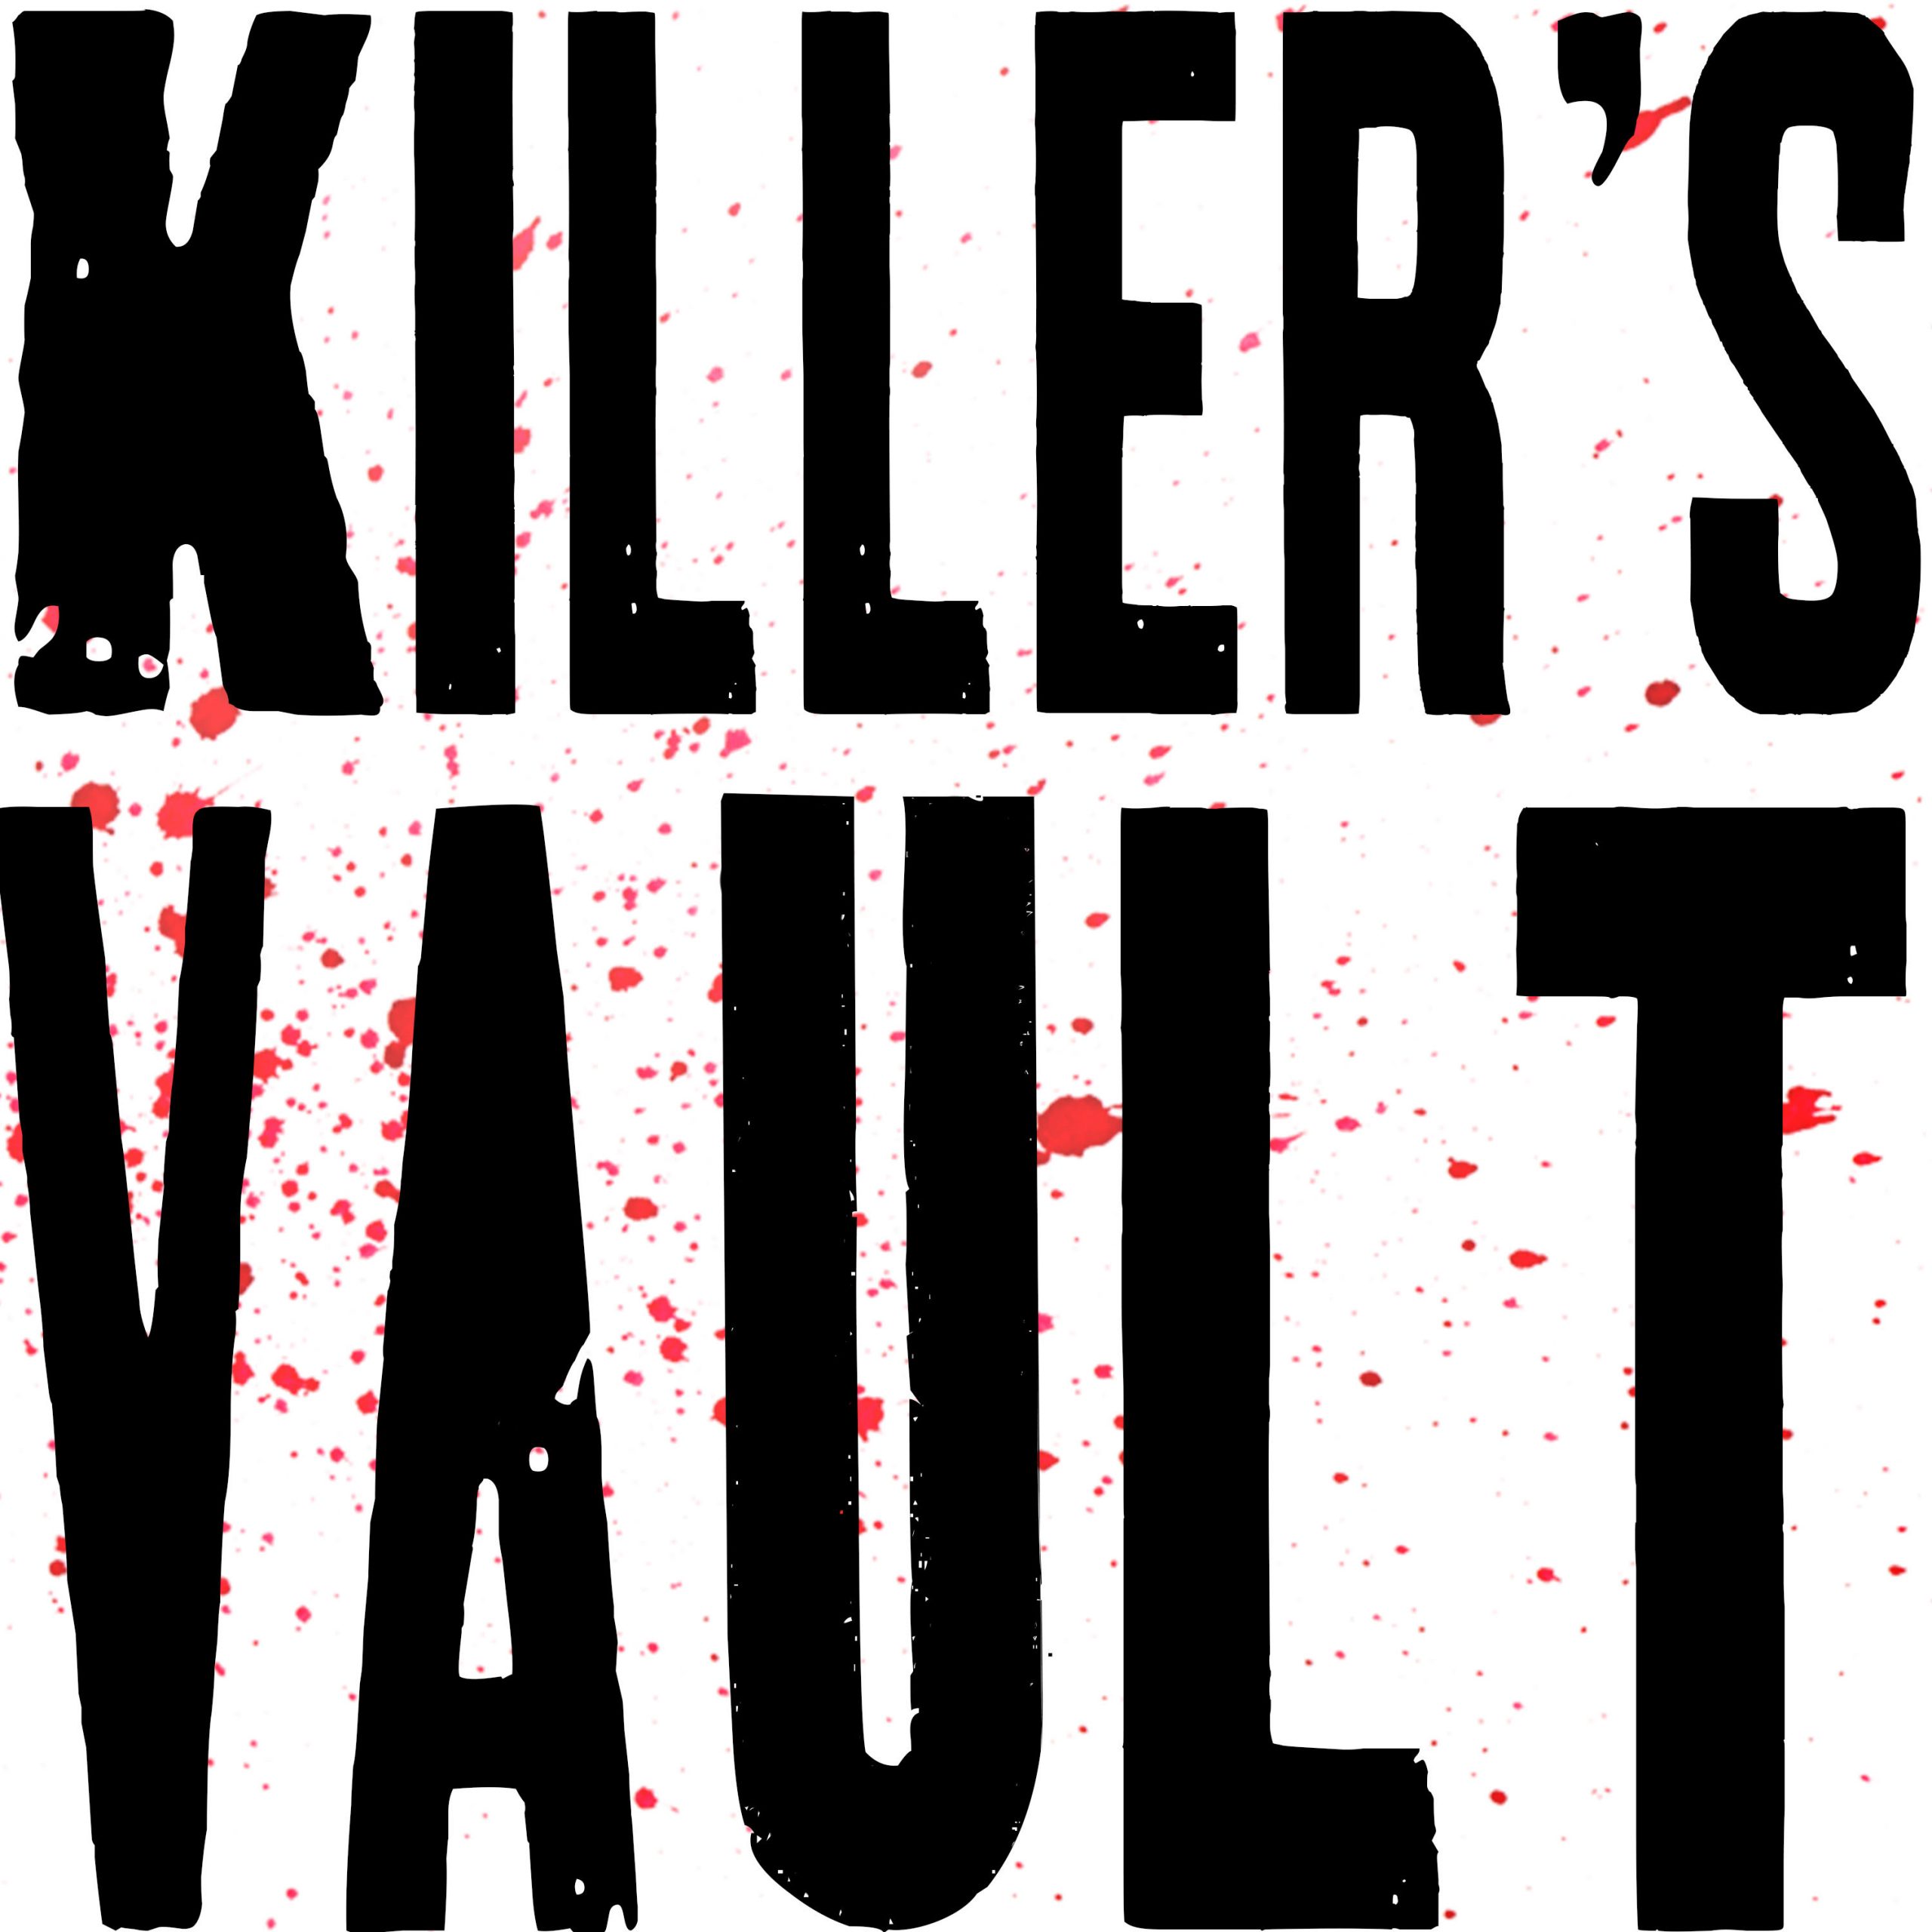 ‘KILLER’S VAULT’ PODCAST WILL REVEAL NEVER-BEFORE-SEEN-OR-HEARD LETTERS AND AUDIO OF AMERICA’S MOST NOTORIOUS SERIAL KILLERS, LAUNCHING JUNE 14, 2021